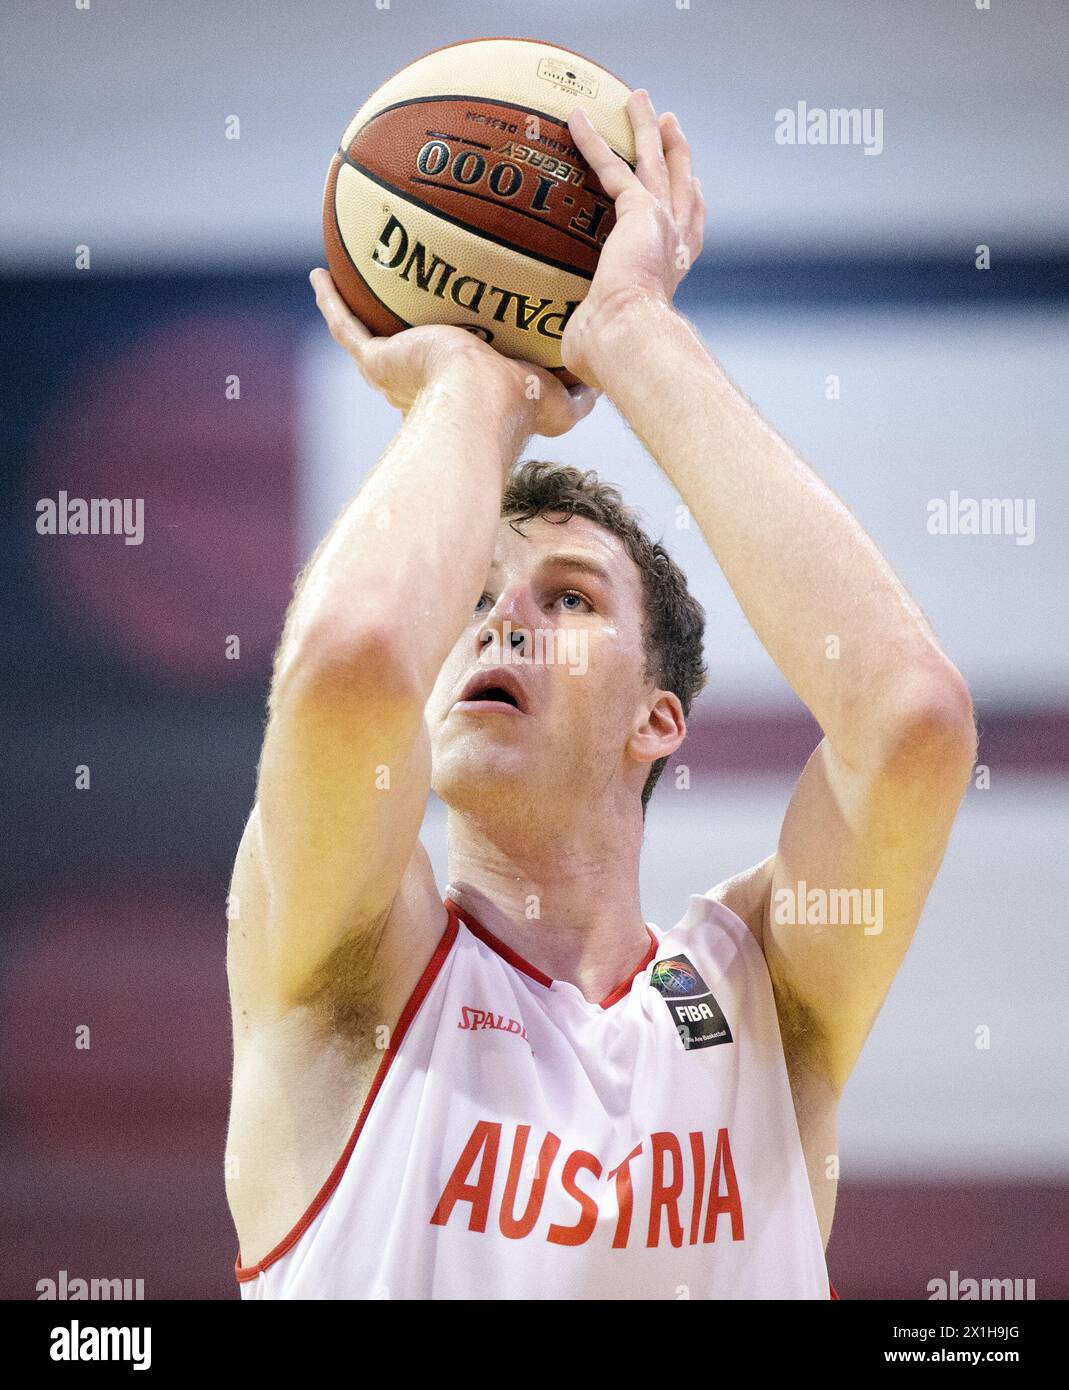 Austrian basketballer Jakob Poeltl from Raptors has been traded to the San Antonio Spurs, the Spurs announced on 18 th July 2018. PICTURE: (FILE PHOTO) Jakob Poeltl   during match between Austria and Bulgaria on 22 nd July 2017 in Güssing, Austria. - 20170722 PD5454 - Rechteinfo: Rights Managed (RM) Stock Photo